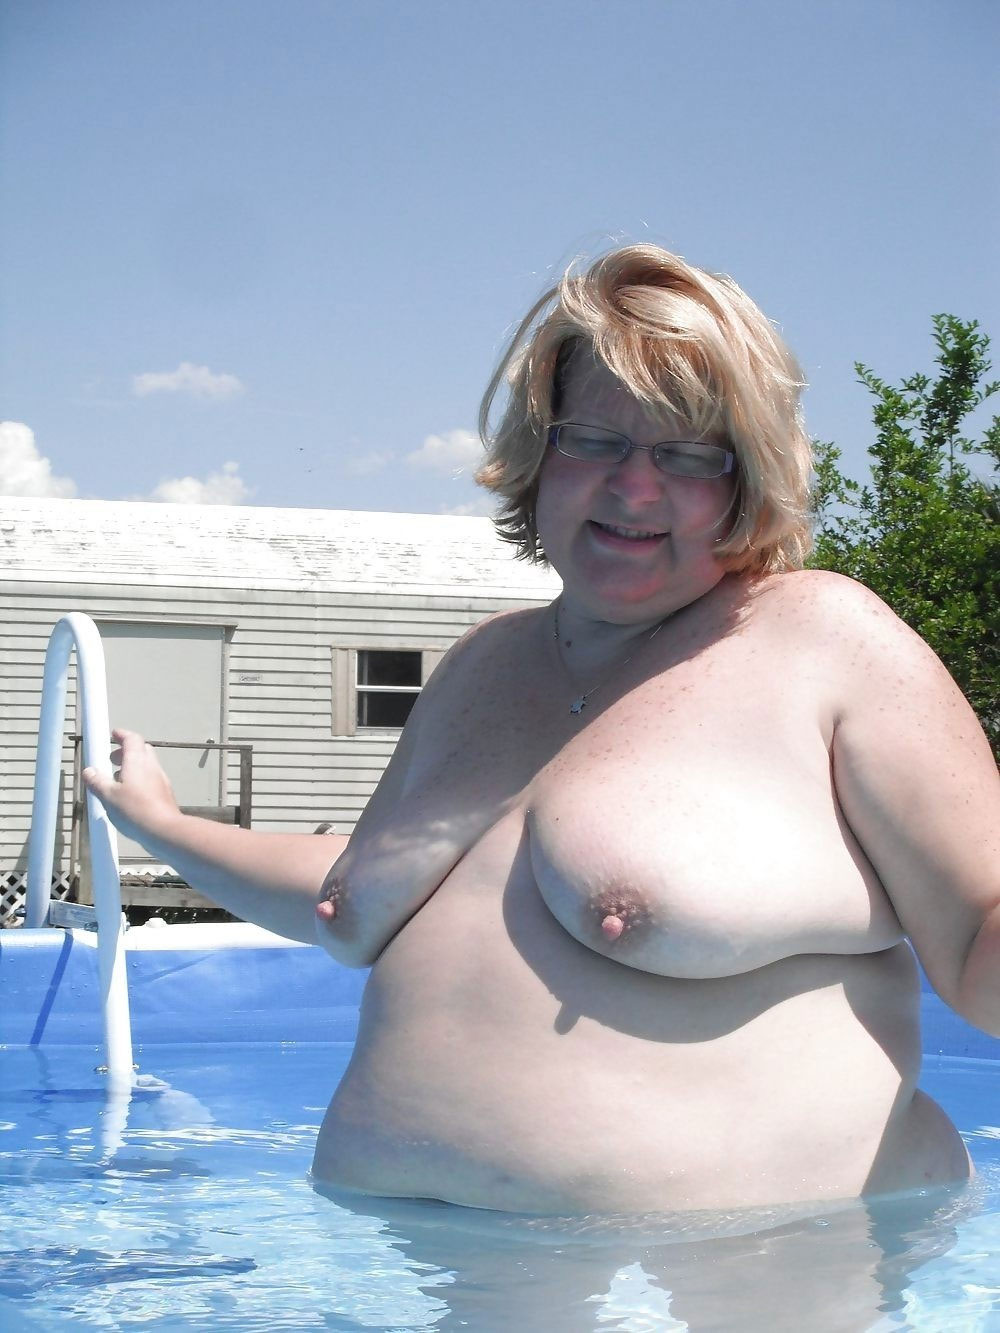 Fat Chicks Nude In Pool - Fat and happy nudist ladies in pool